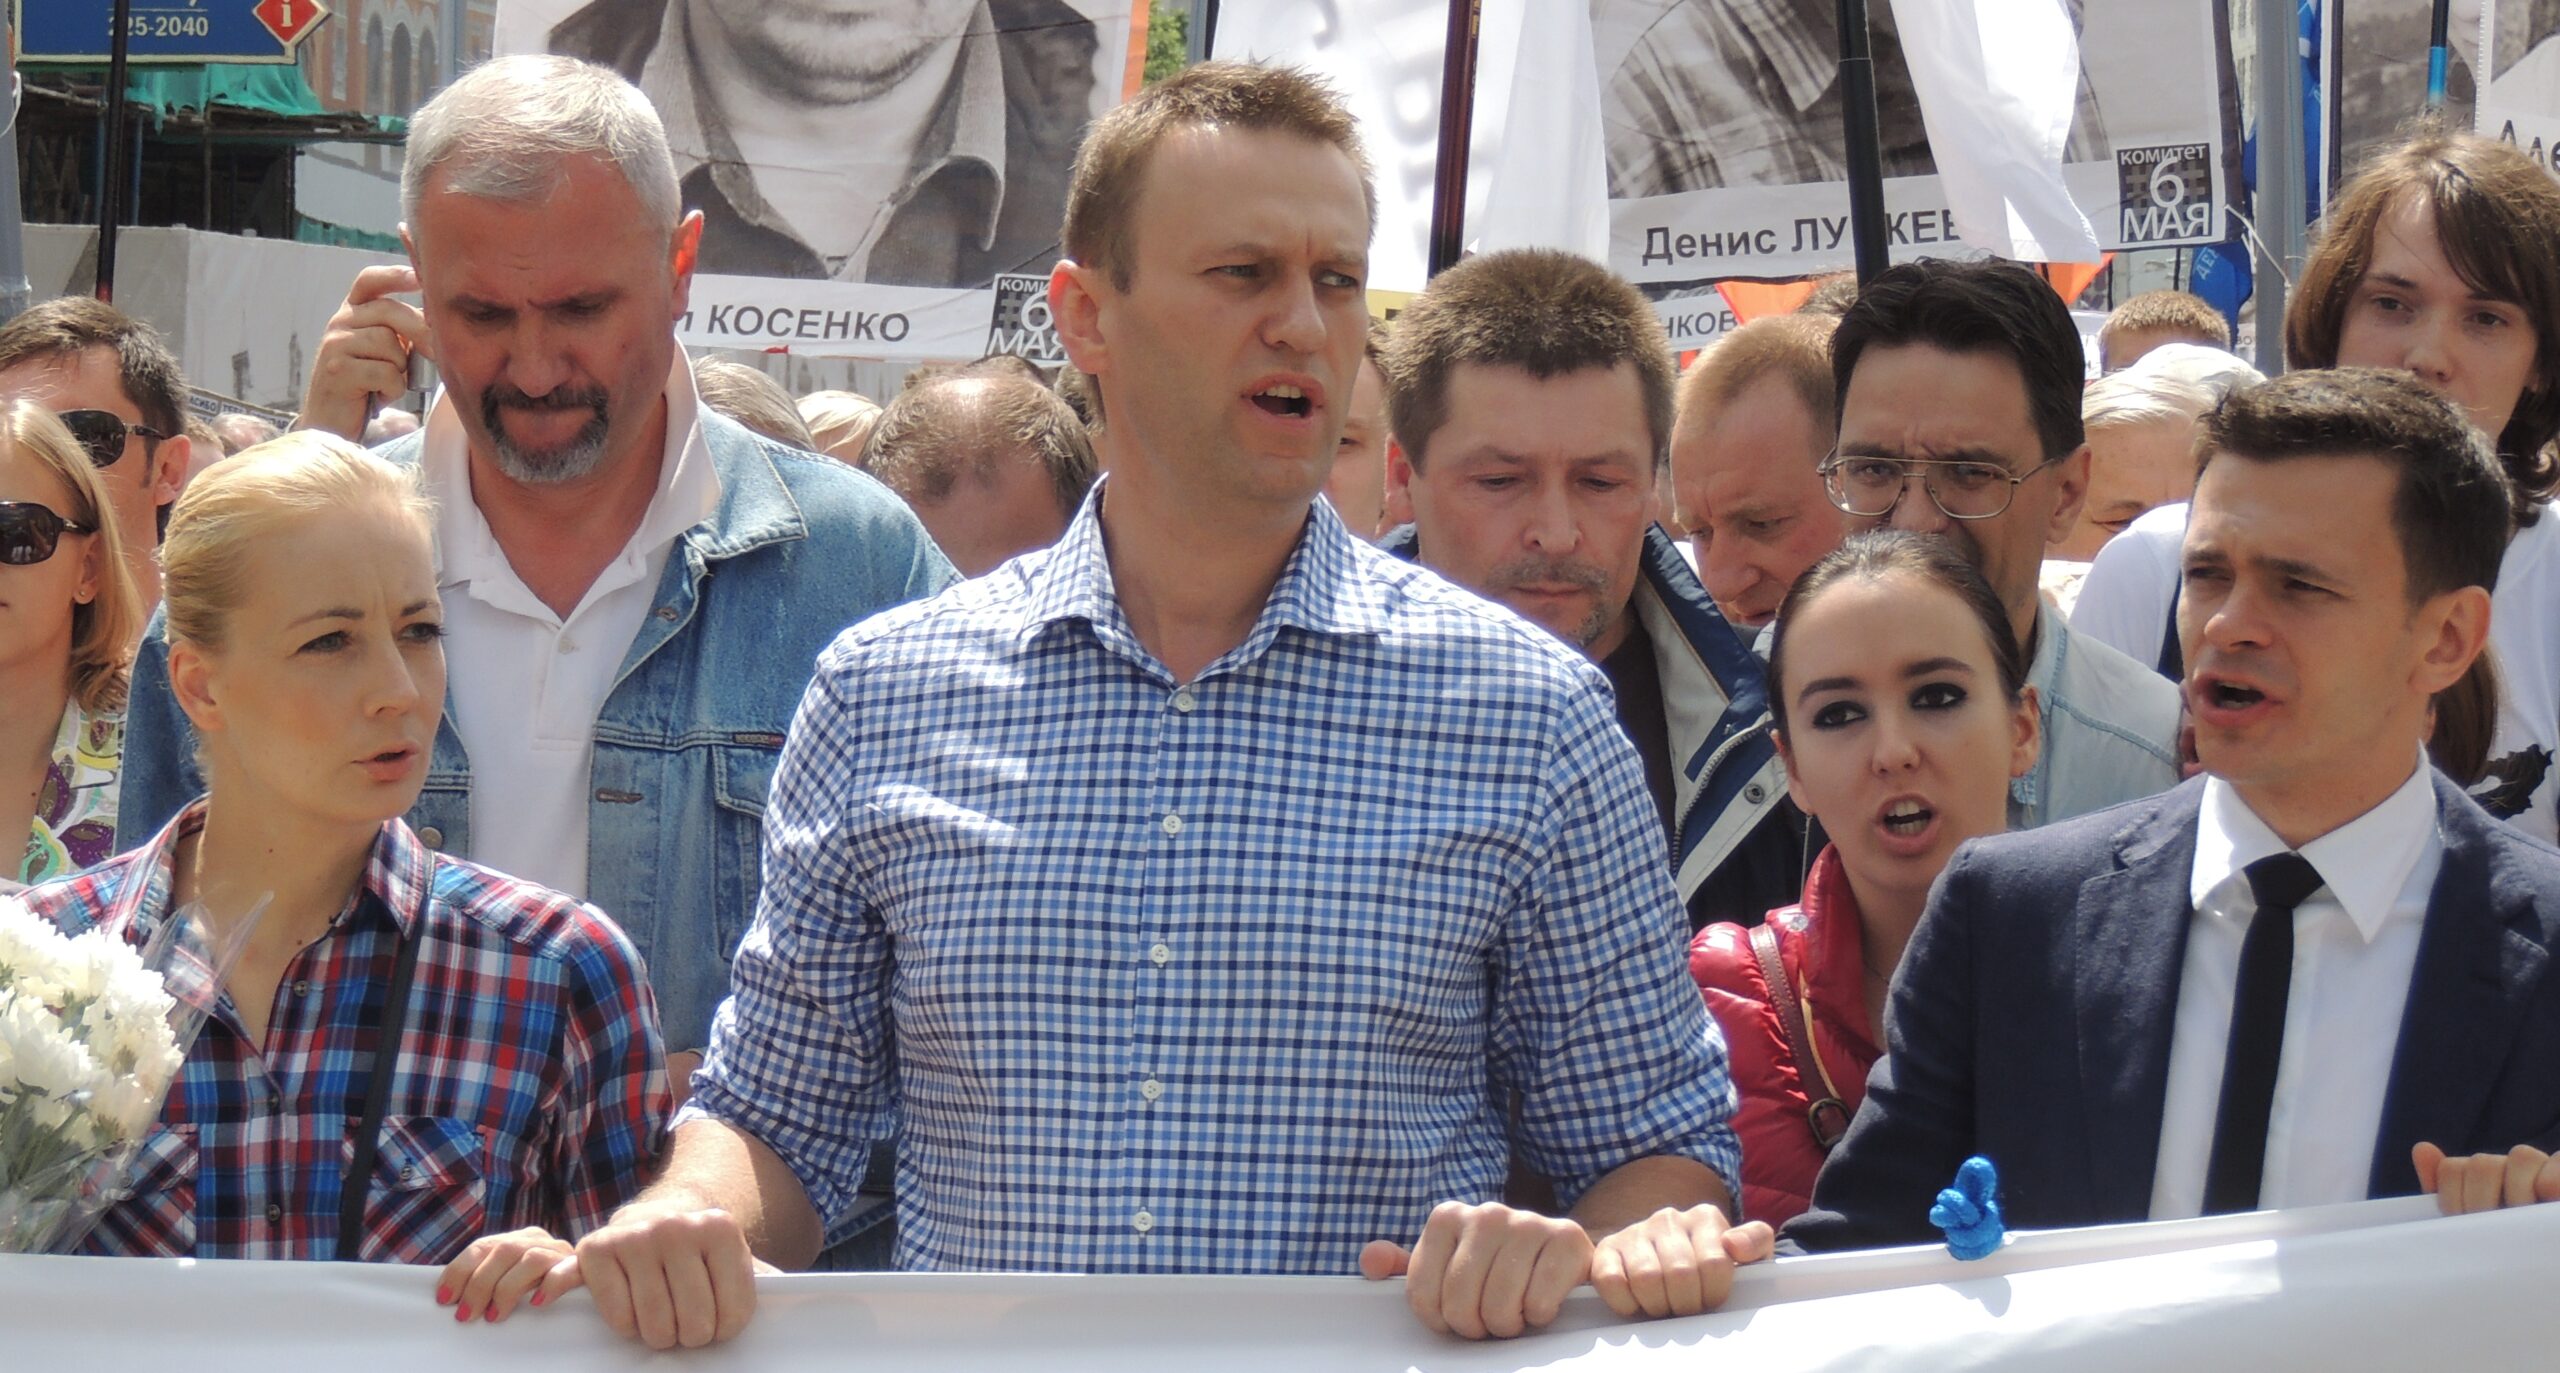 Remembering Alexei Navalny: Personal Insights and Reflections